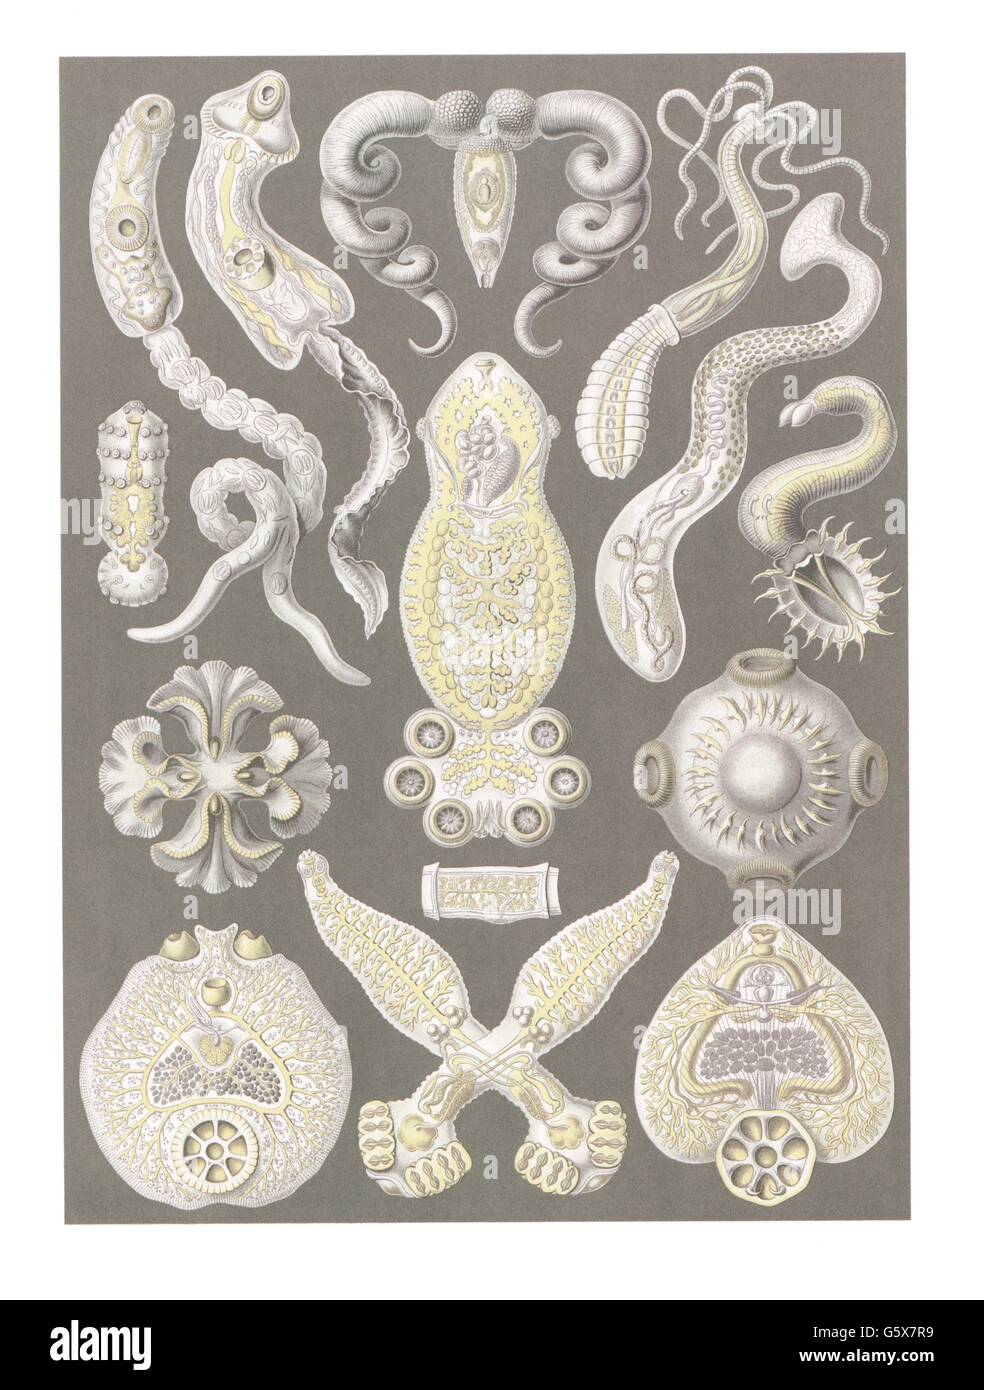 zoology / animals, platyzoa, flatworms (Platyhelminthes), colour lithograph, out of: Ernst Haeckel, 'Kunstformen der Natur', Leipzig - Vienna, 1899 - 1904, Additional-Rights-Clearences-Not Available Stock Photo